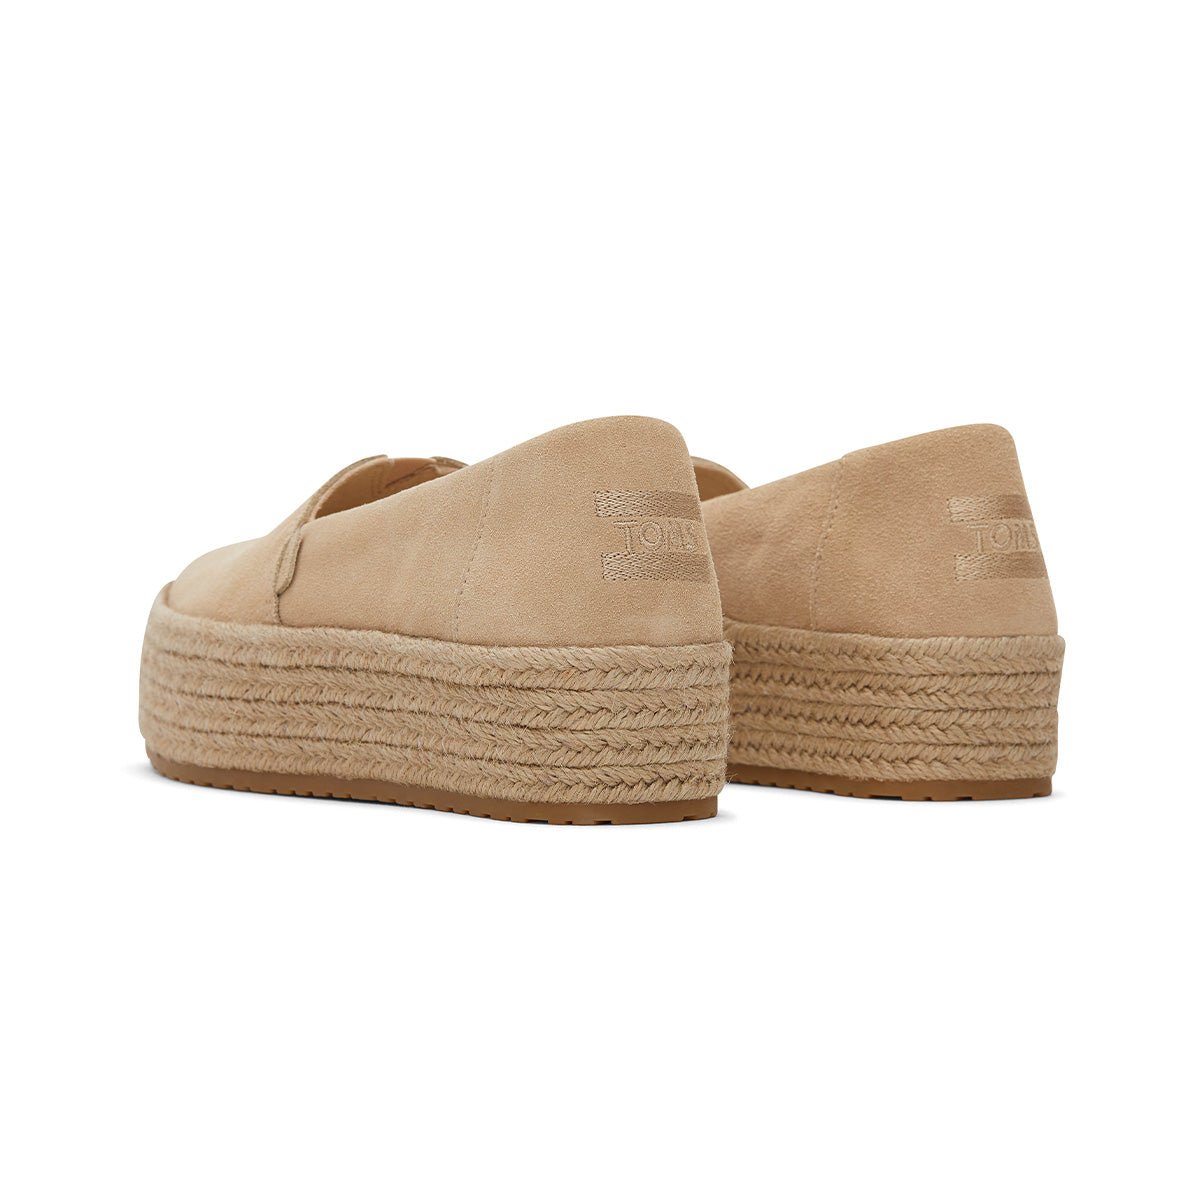 TOMS Espadrille Valencia Women - Oatmeal Yellow Suede Canvas